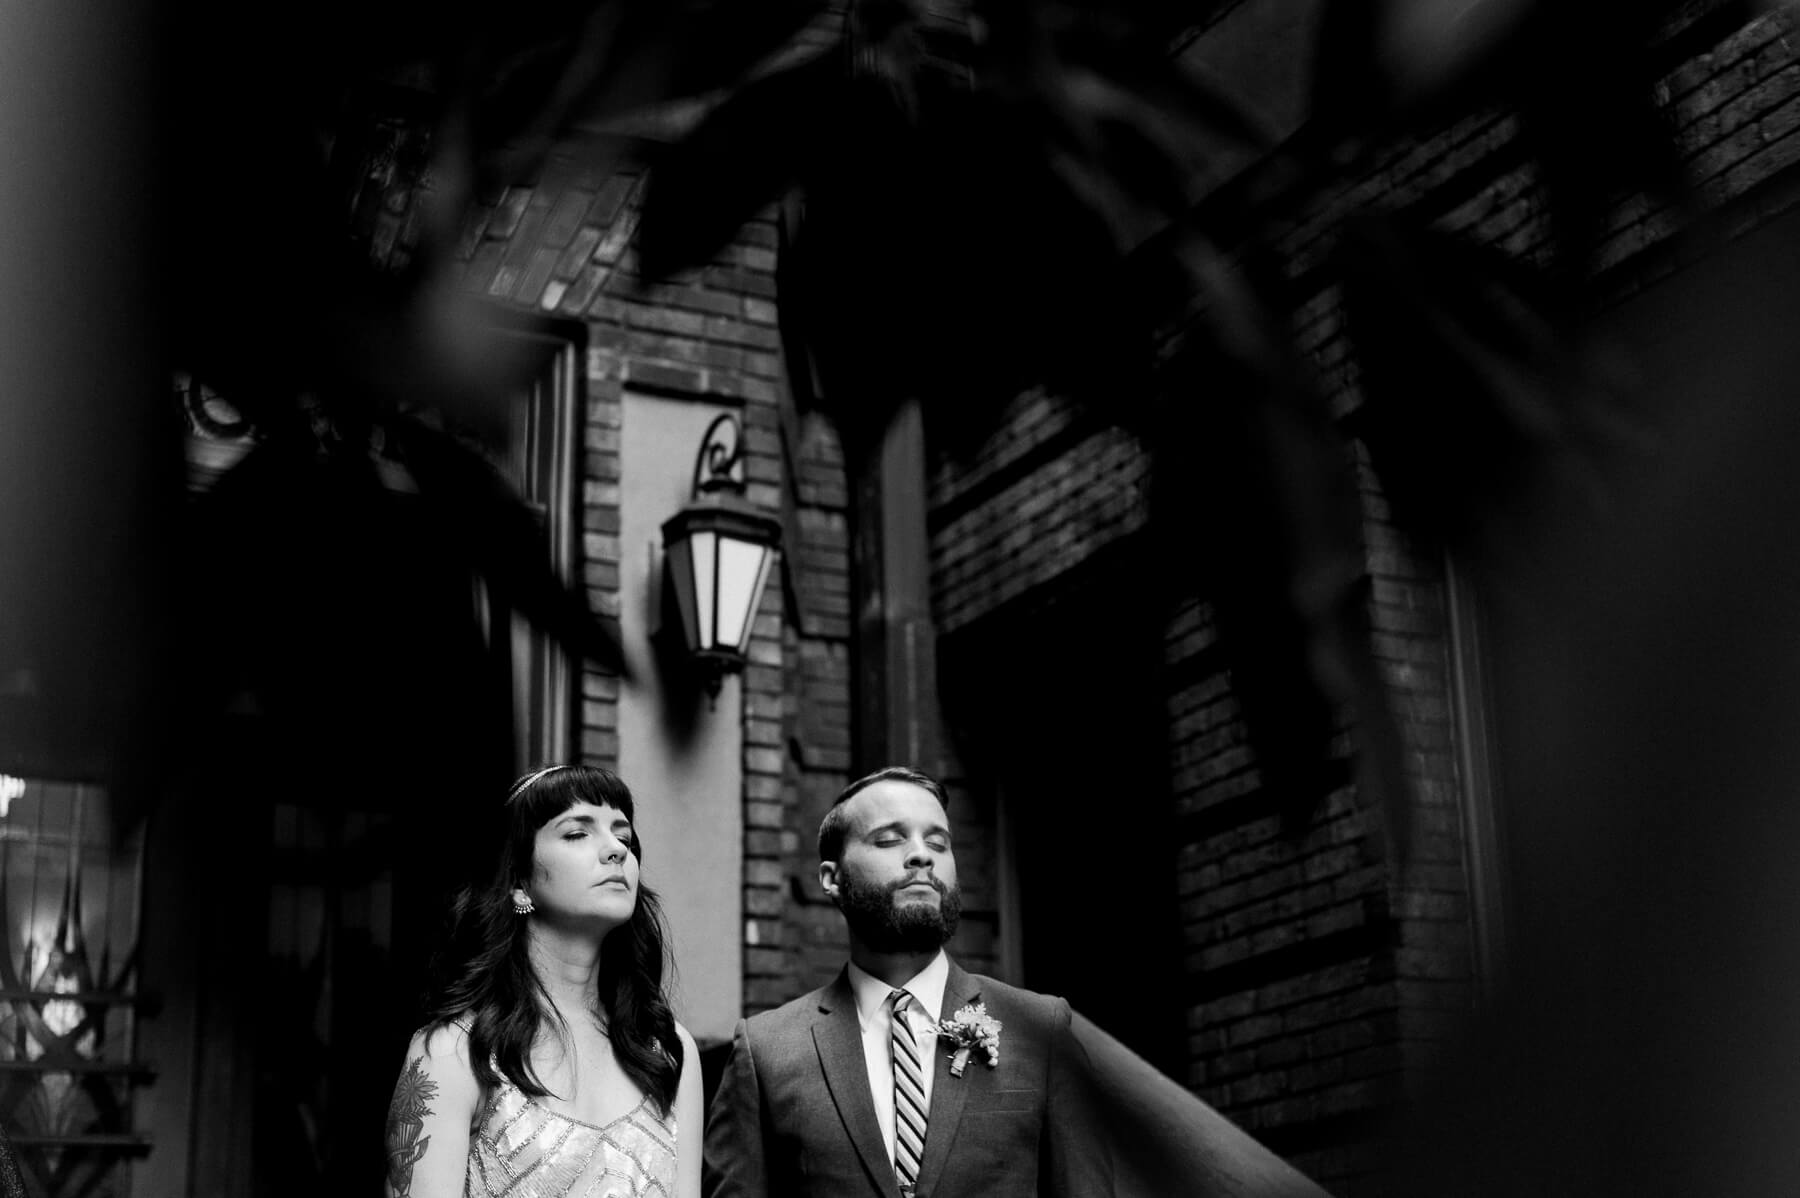 An intimate portrait of a bride and groom in Portland, Oregon by Portland wedding photographer Briana Morrison